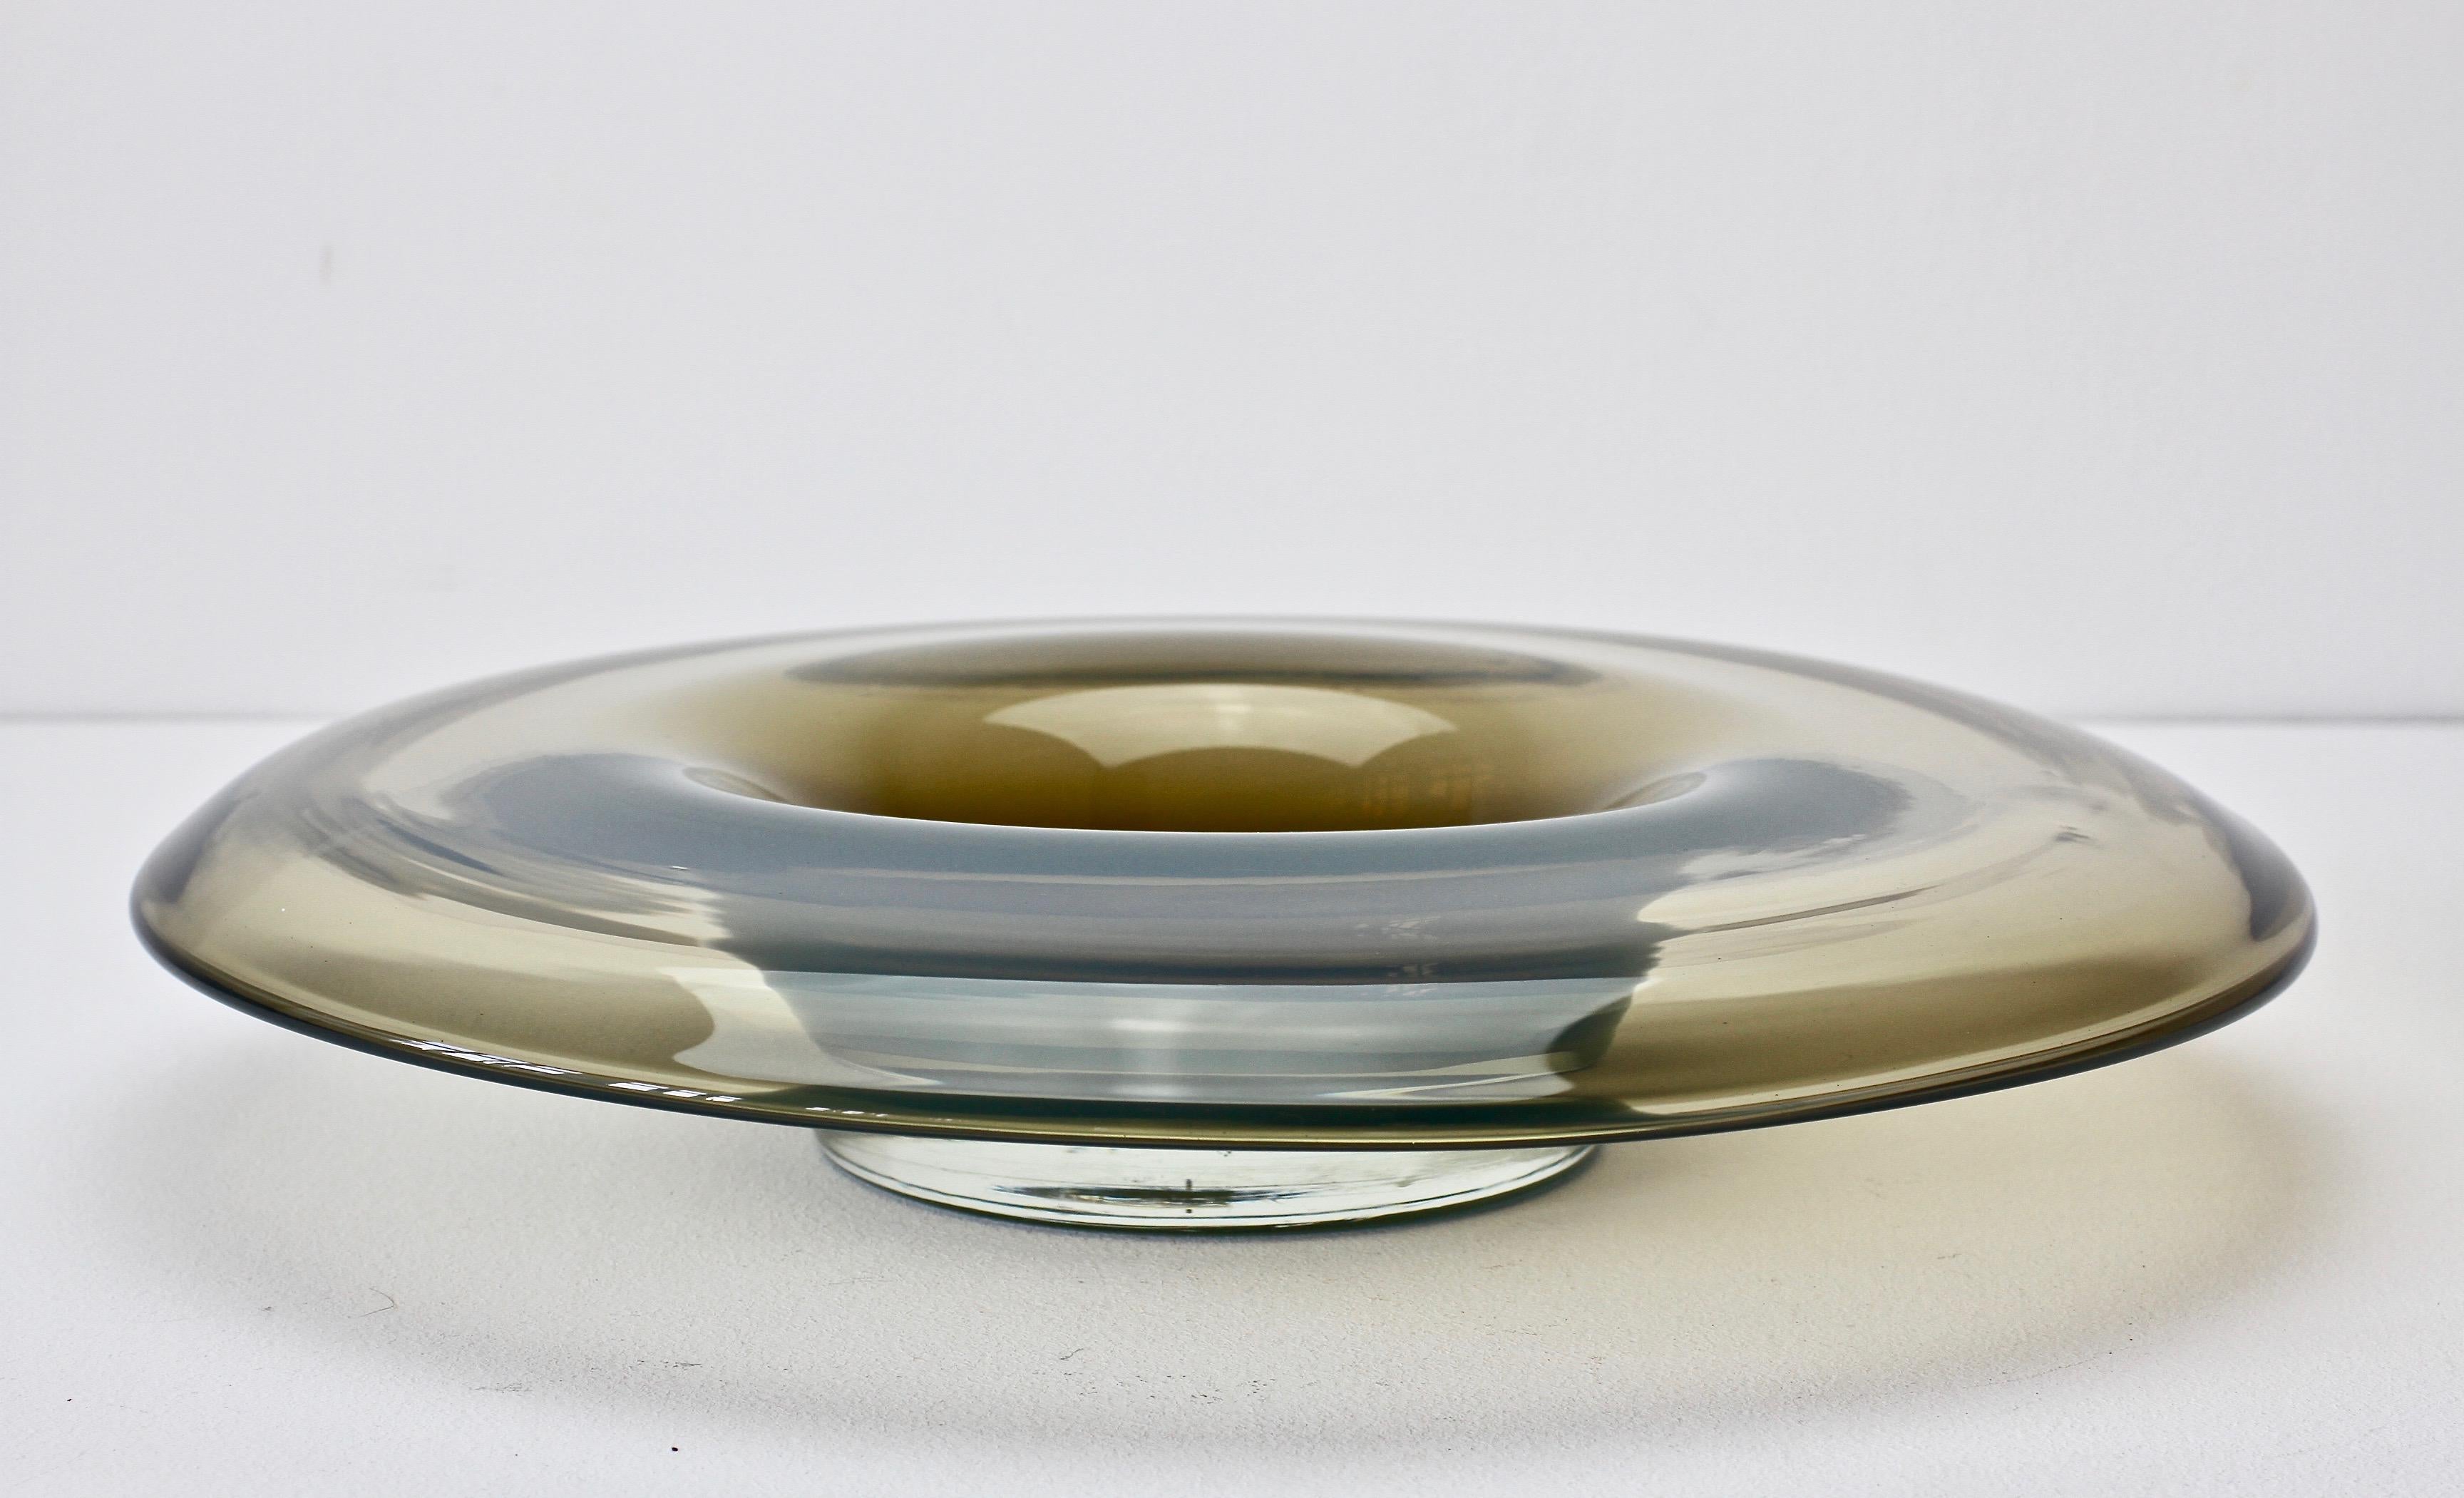 Italian Murano glass 'Opalino' serving or dipping bowl by Antonio da Ros for Cenedese, Italy, circa 1970-1990. Wonderful translucent color of smoked grey. Simplistic yet elegant form - almost futuristic. Very fun to dine with this rare piece of